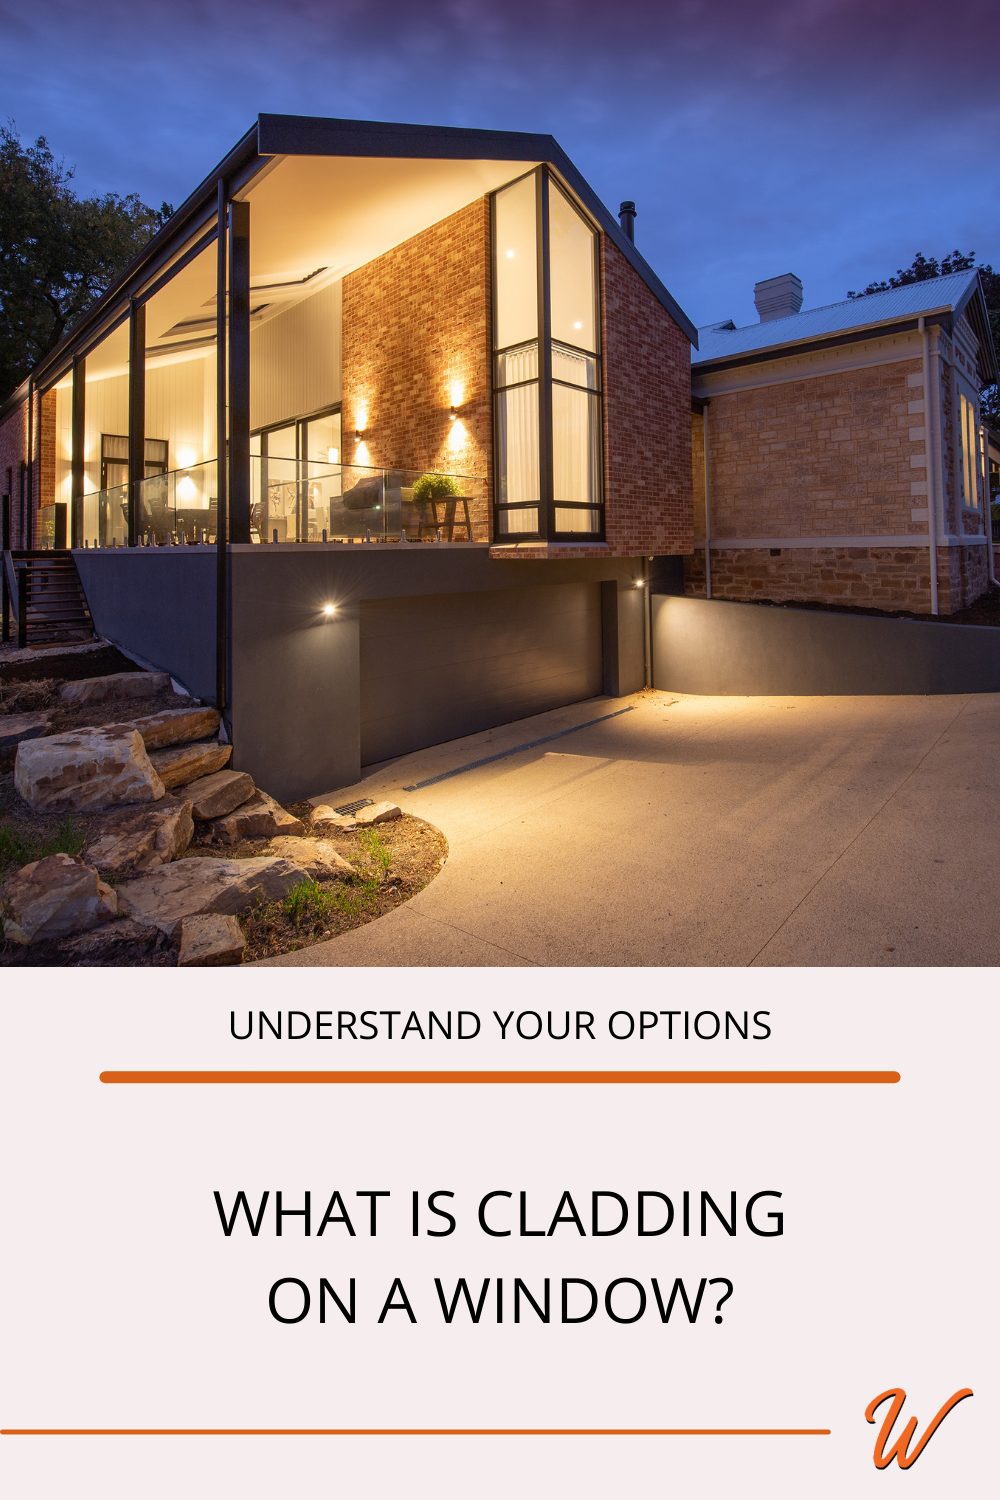 Contemporary home at dusk captioned with "Understand your options: What is Cladding on a window?"